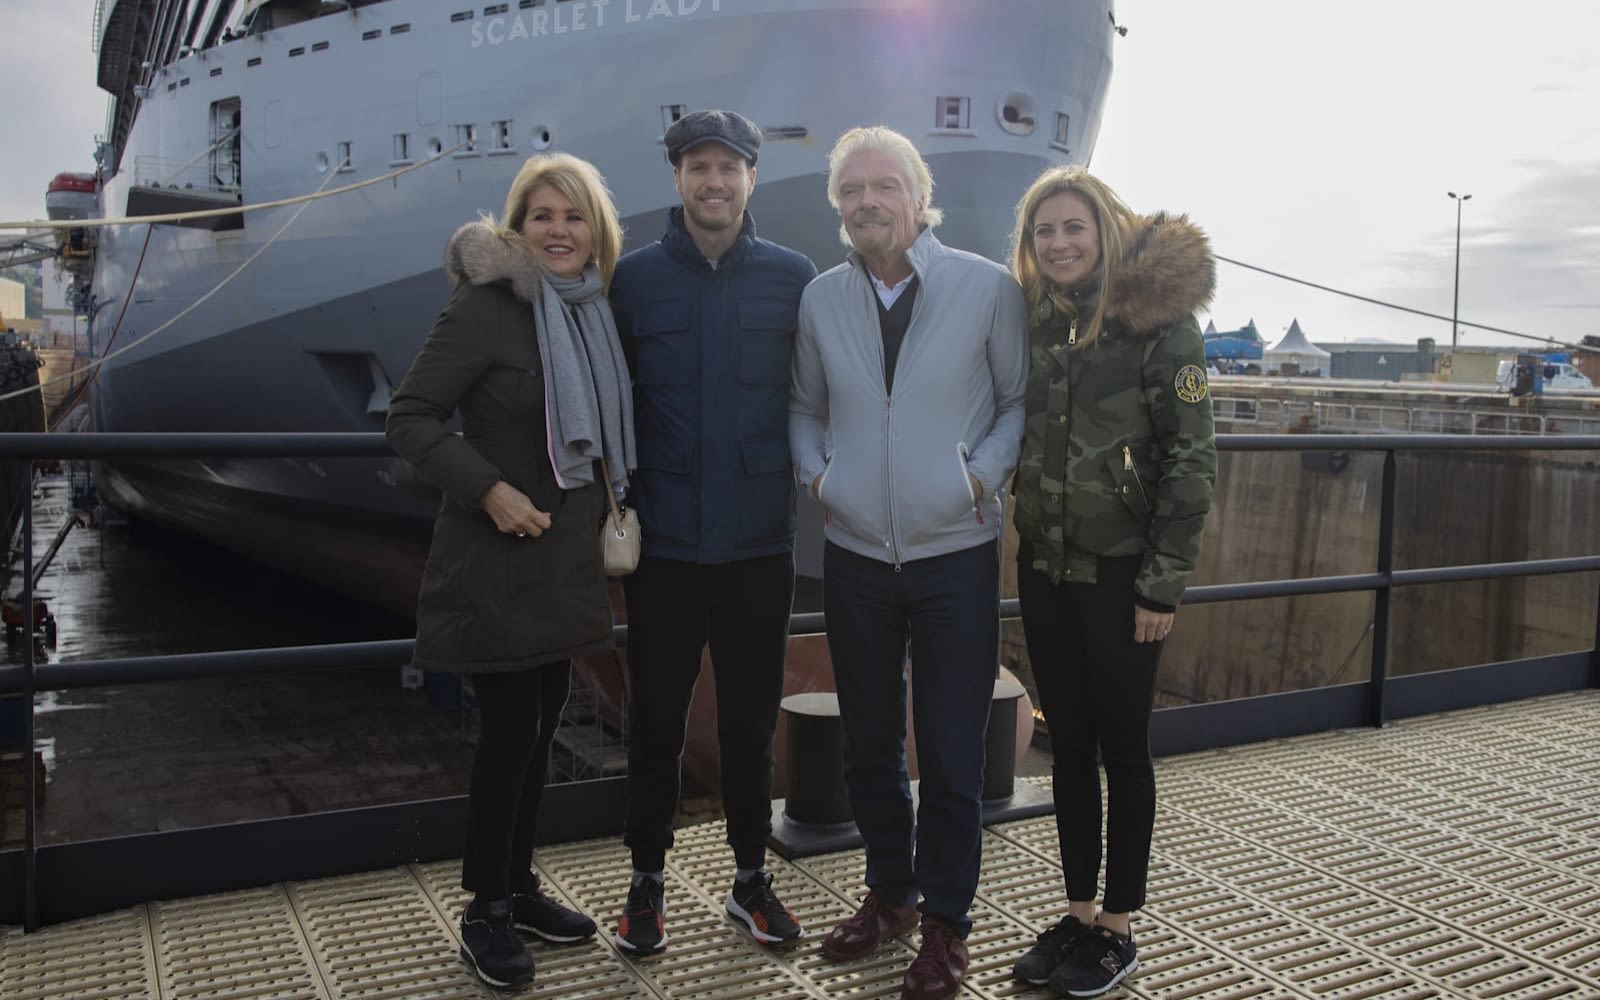 Richard Branson with his wife Joan and their children Sam and Holly in front of Virgin Voyages' ship Scarlet Lady